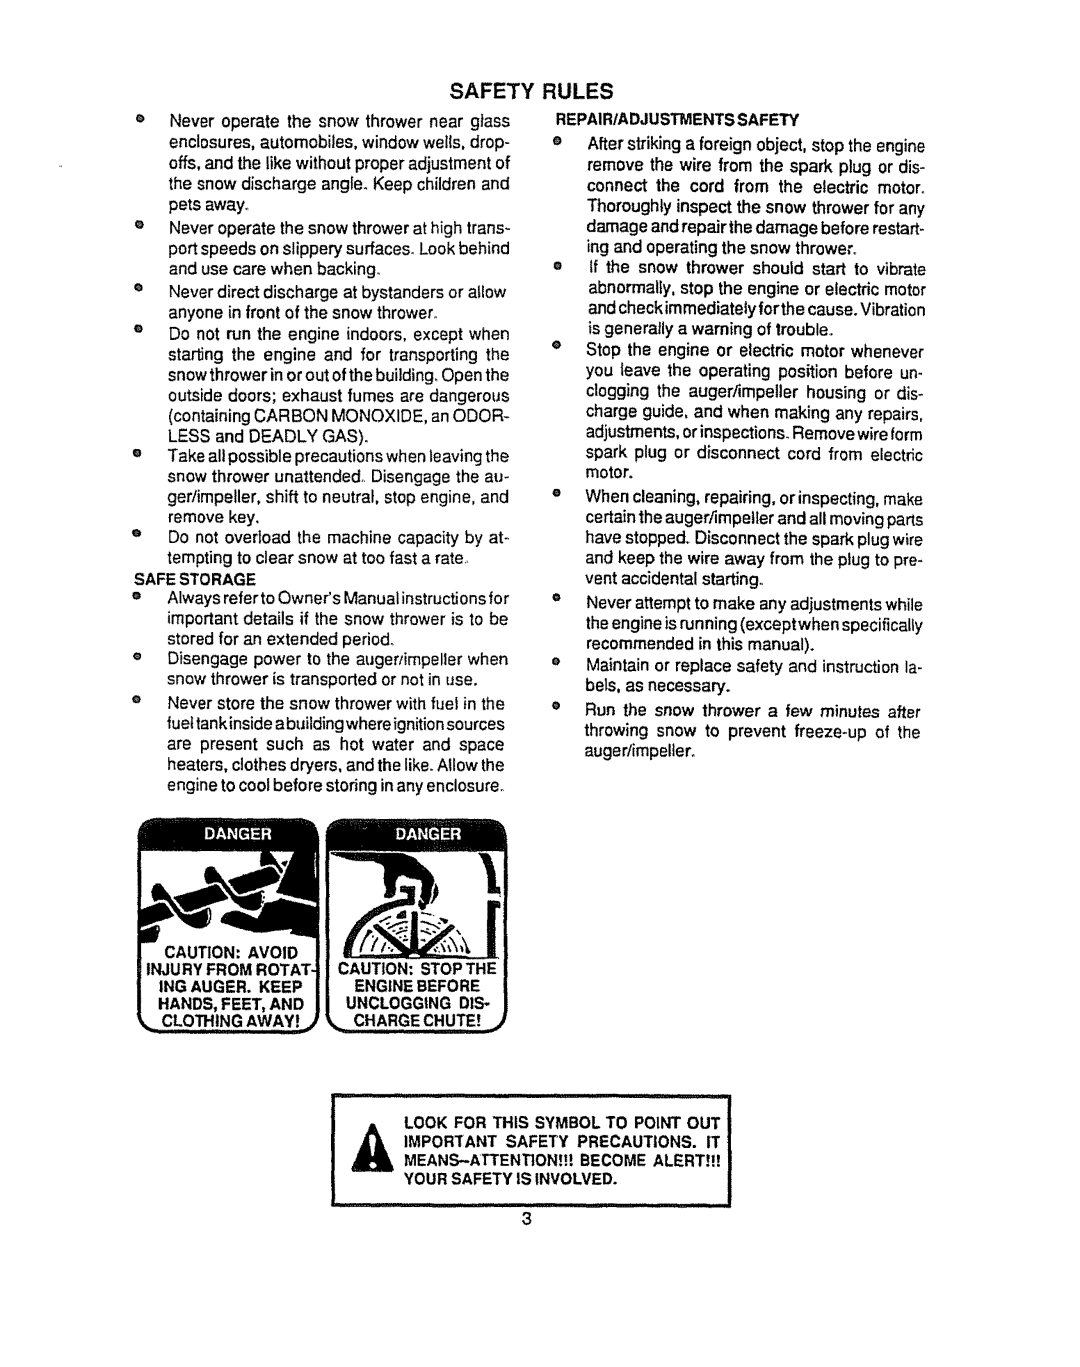 Sears 536.884821 manual Safety Rules, Safe Storage, Repair/Adjustments Safety, Look For This Symbol To Point Out 